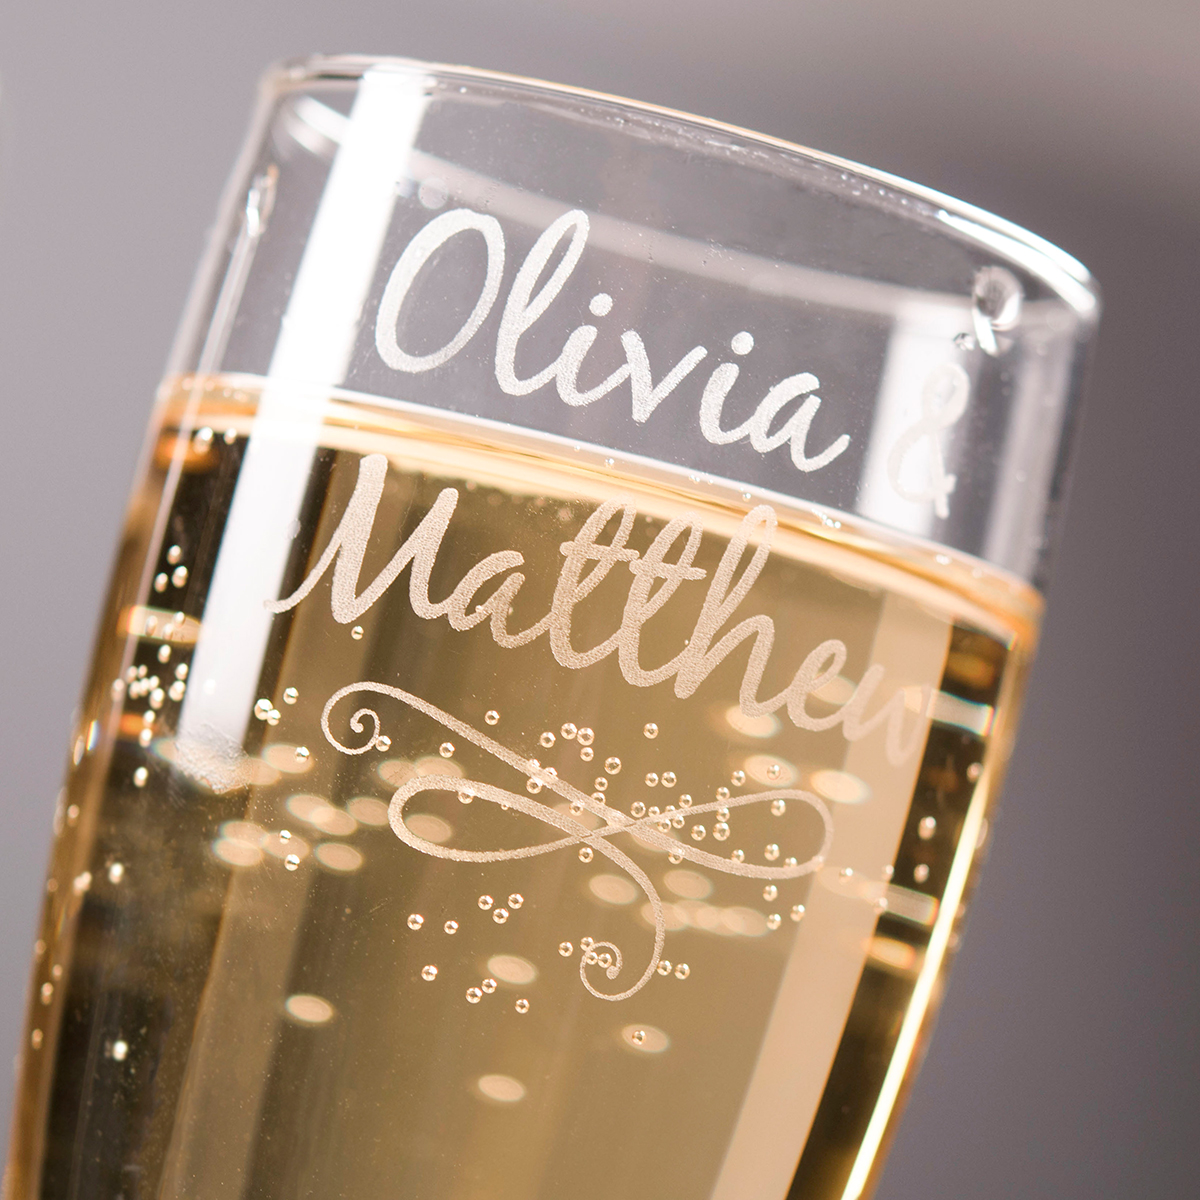 Personalised Engraved Set Of 2 Champagne Flutes - Two Names